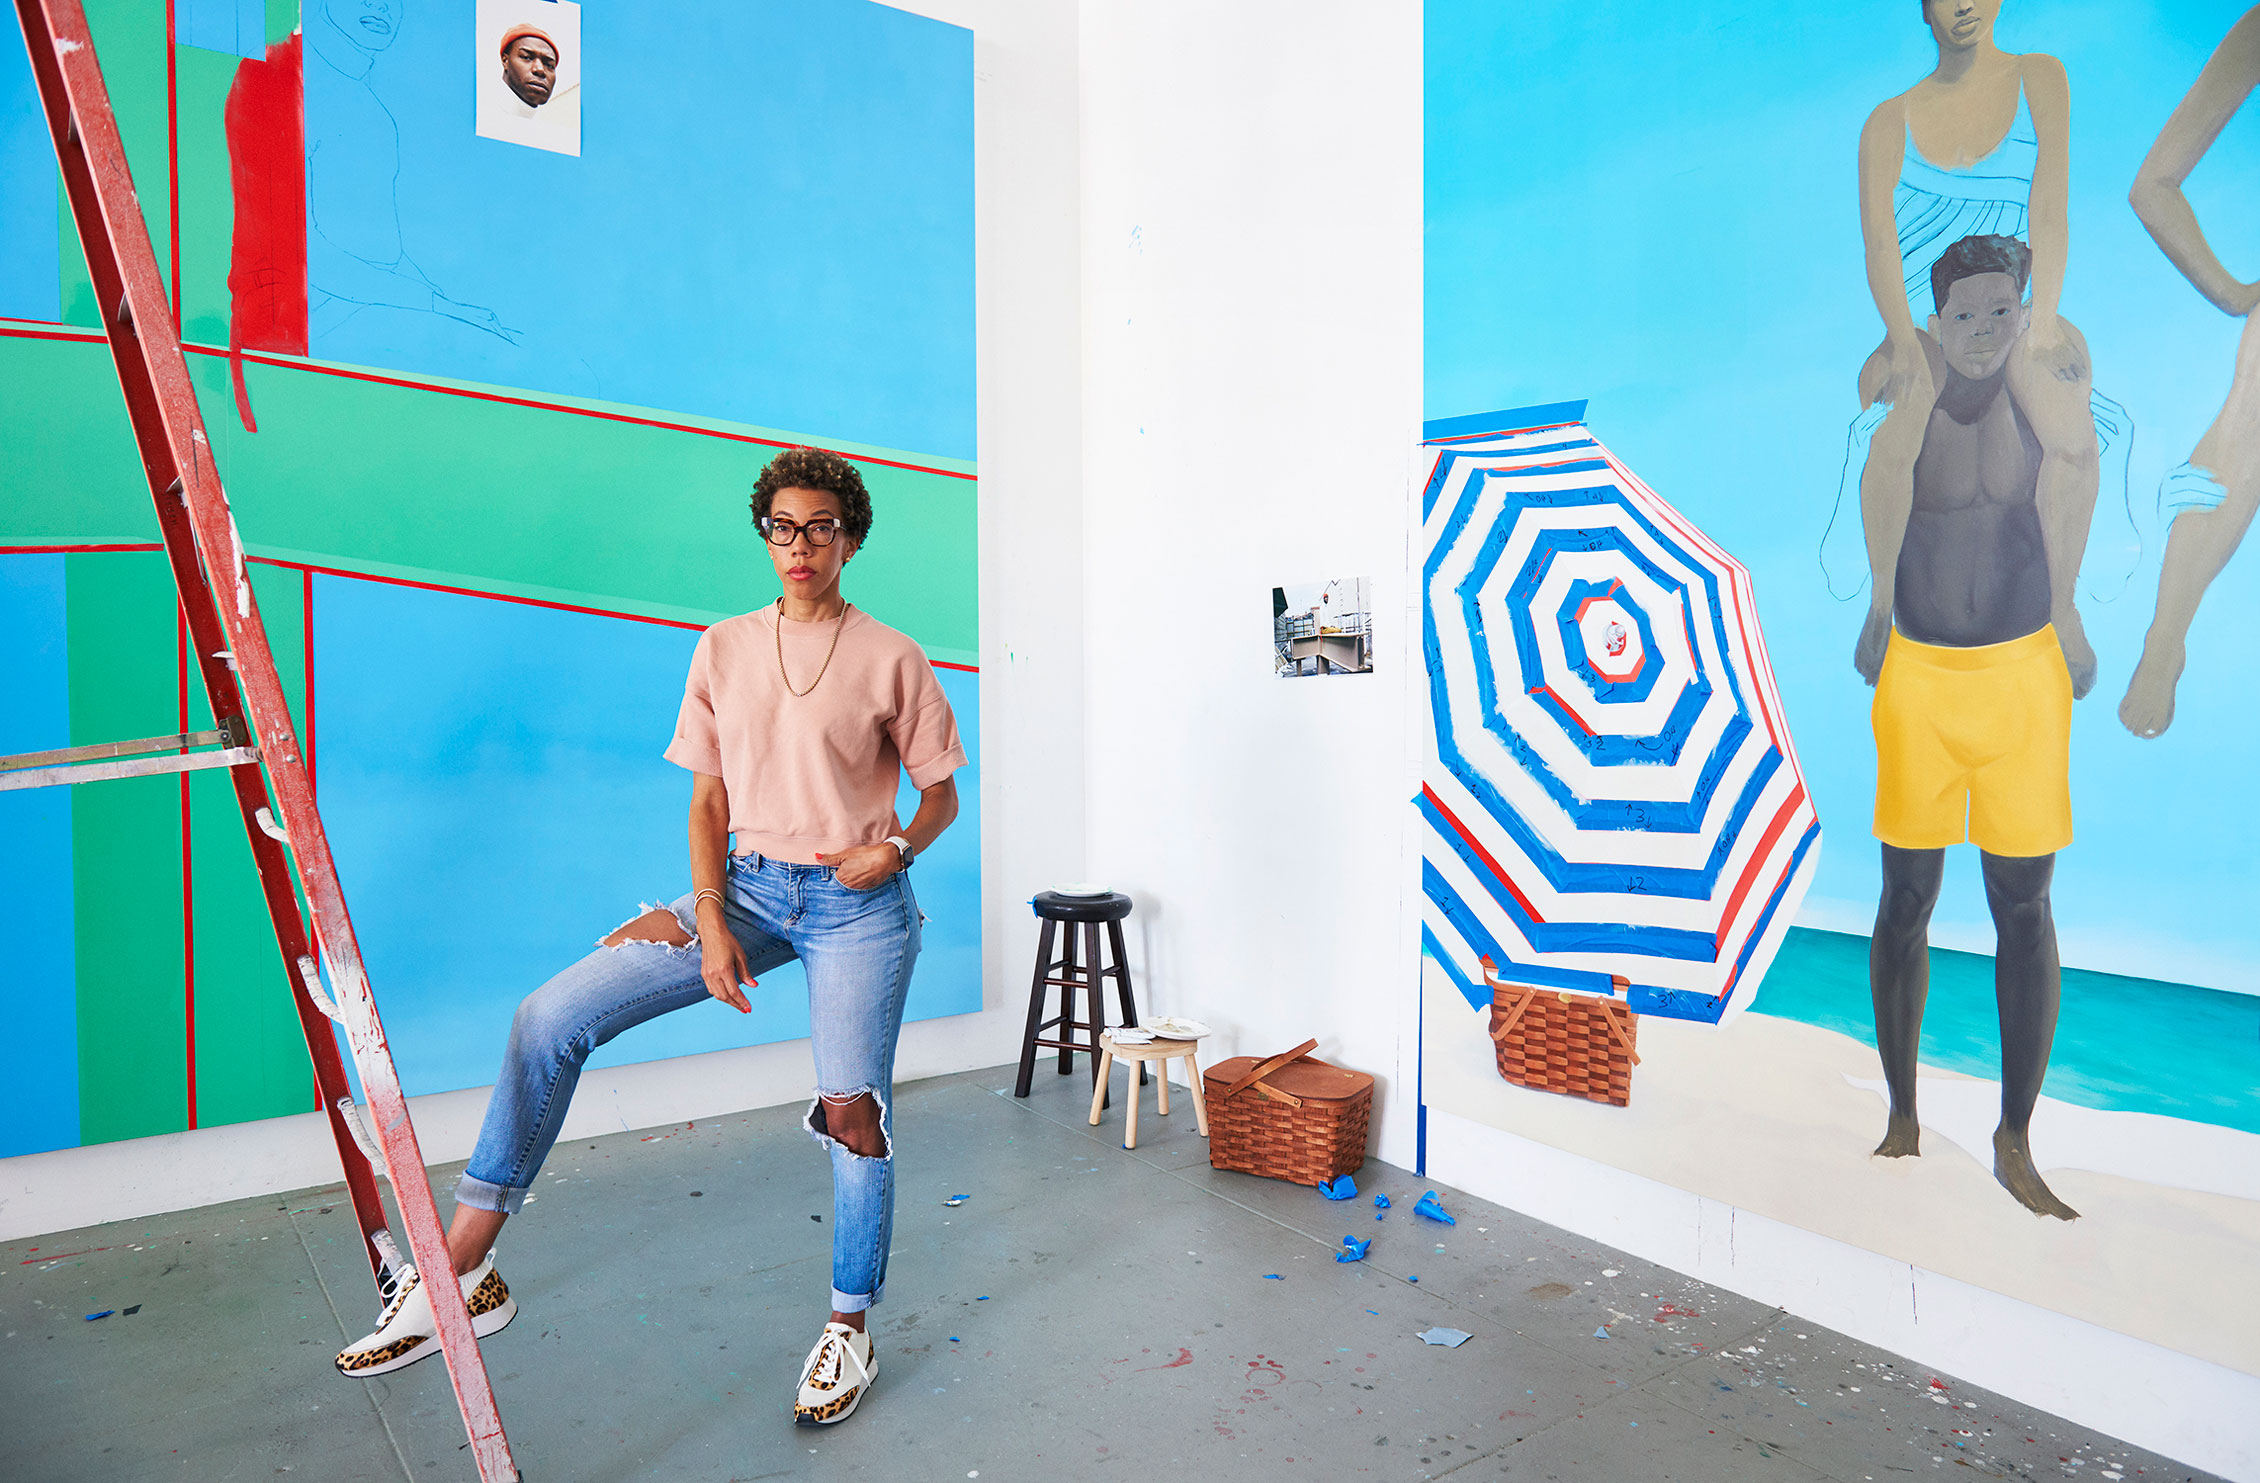 Amy Sherald in her studio with works in progress for her Hauser & Wirth debut.